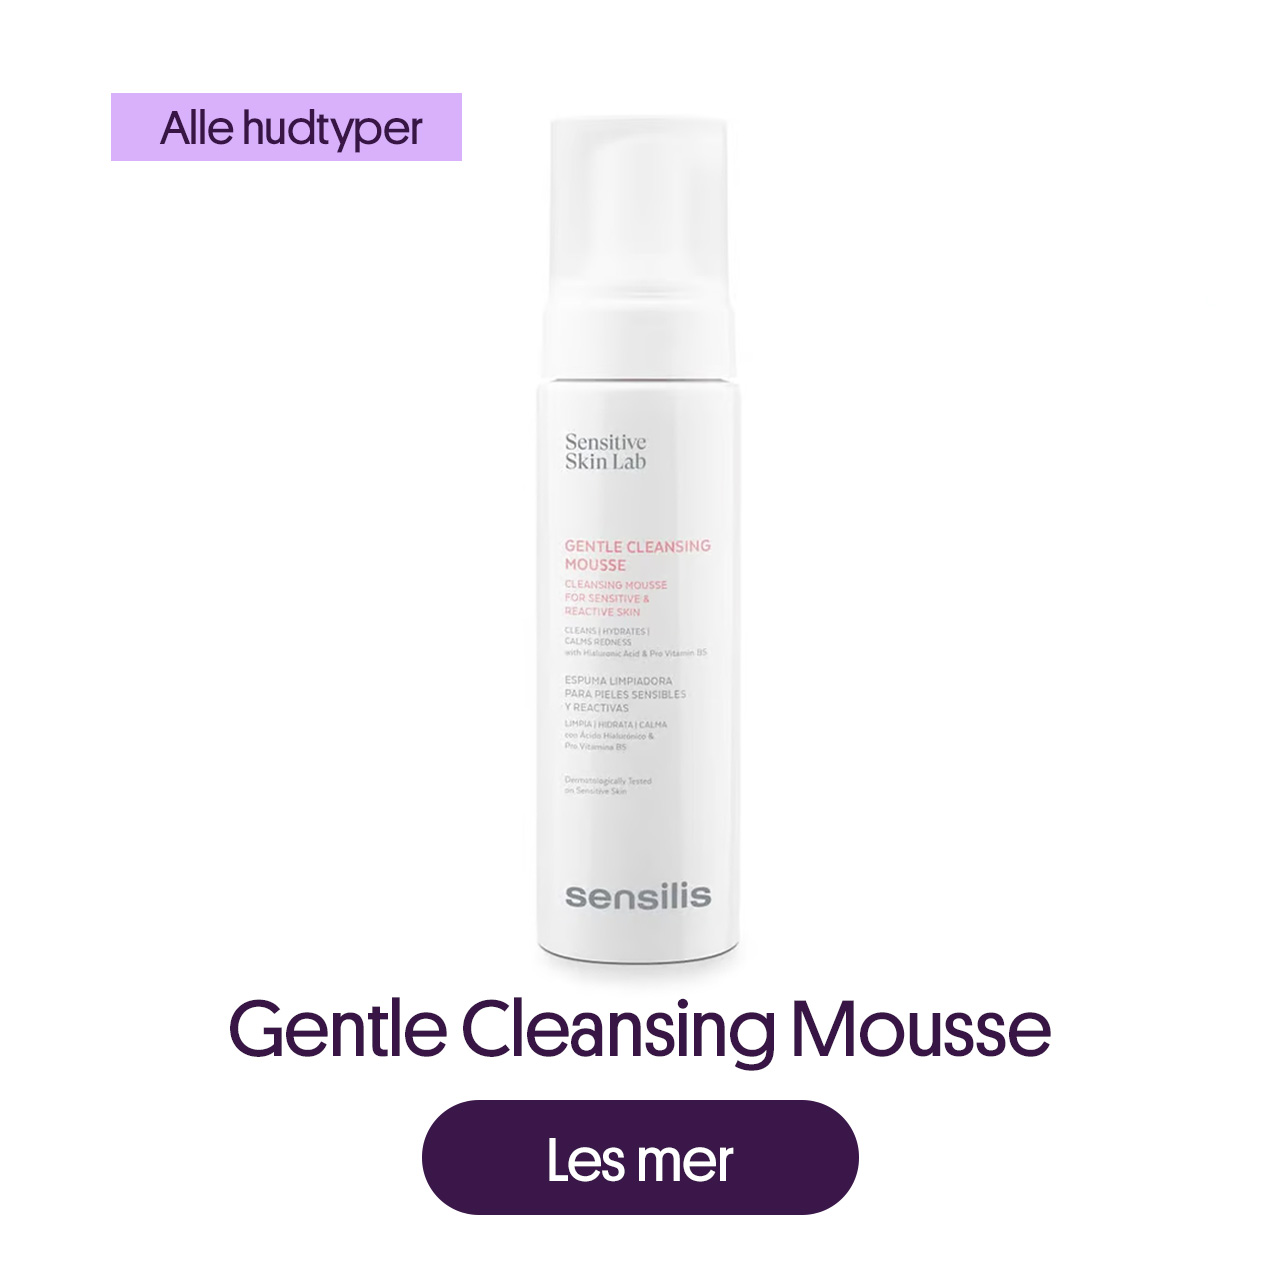 Cleansing mousse